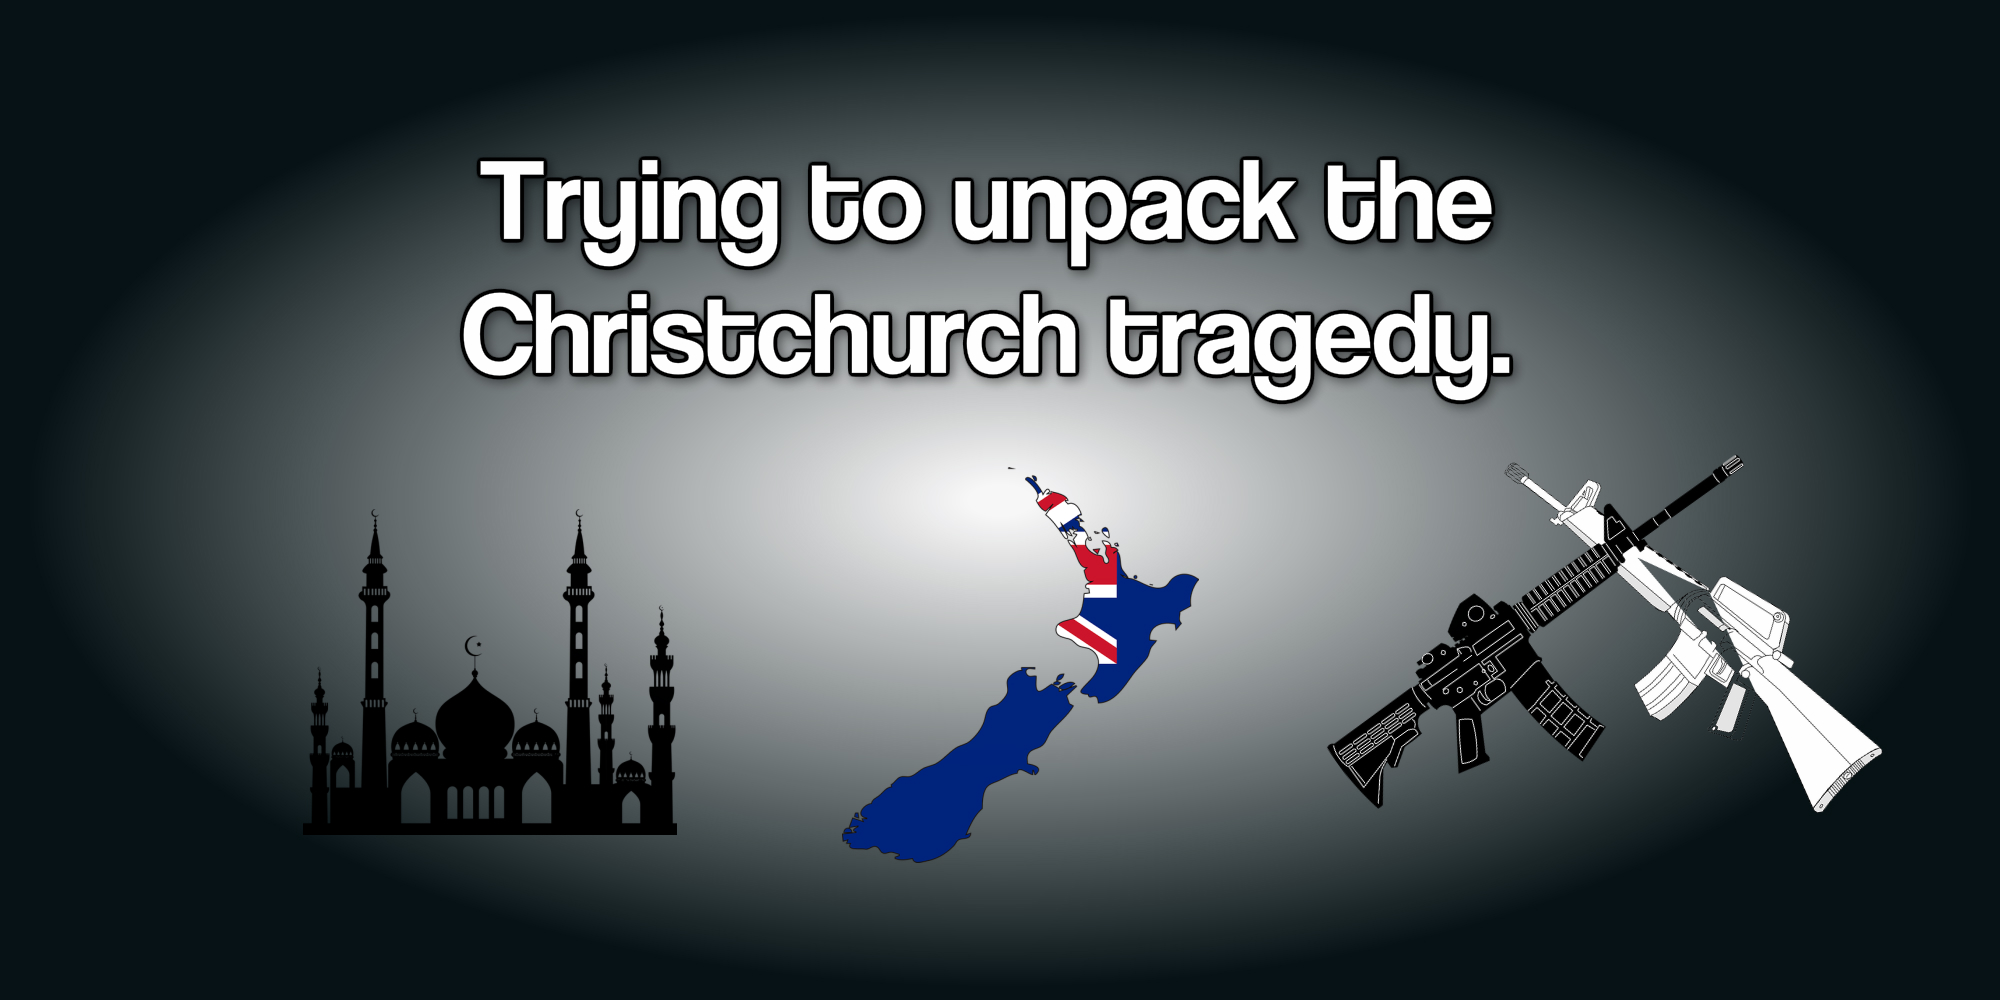 Trying to unpack the Christchurch tragedy.